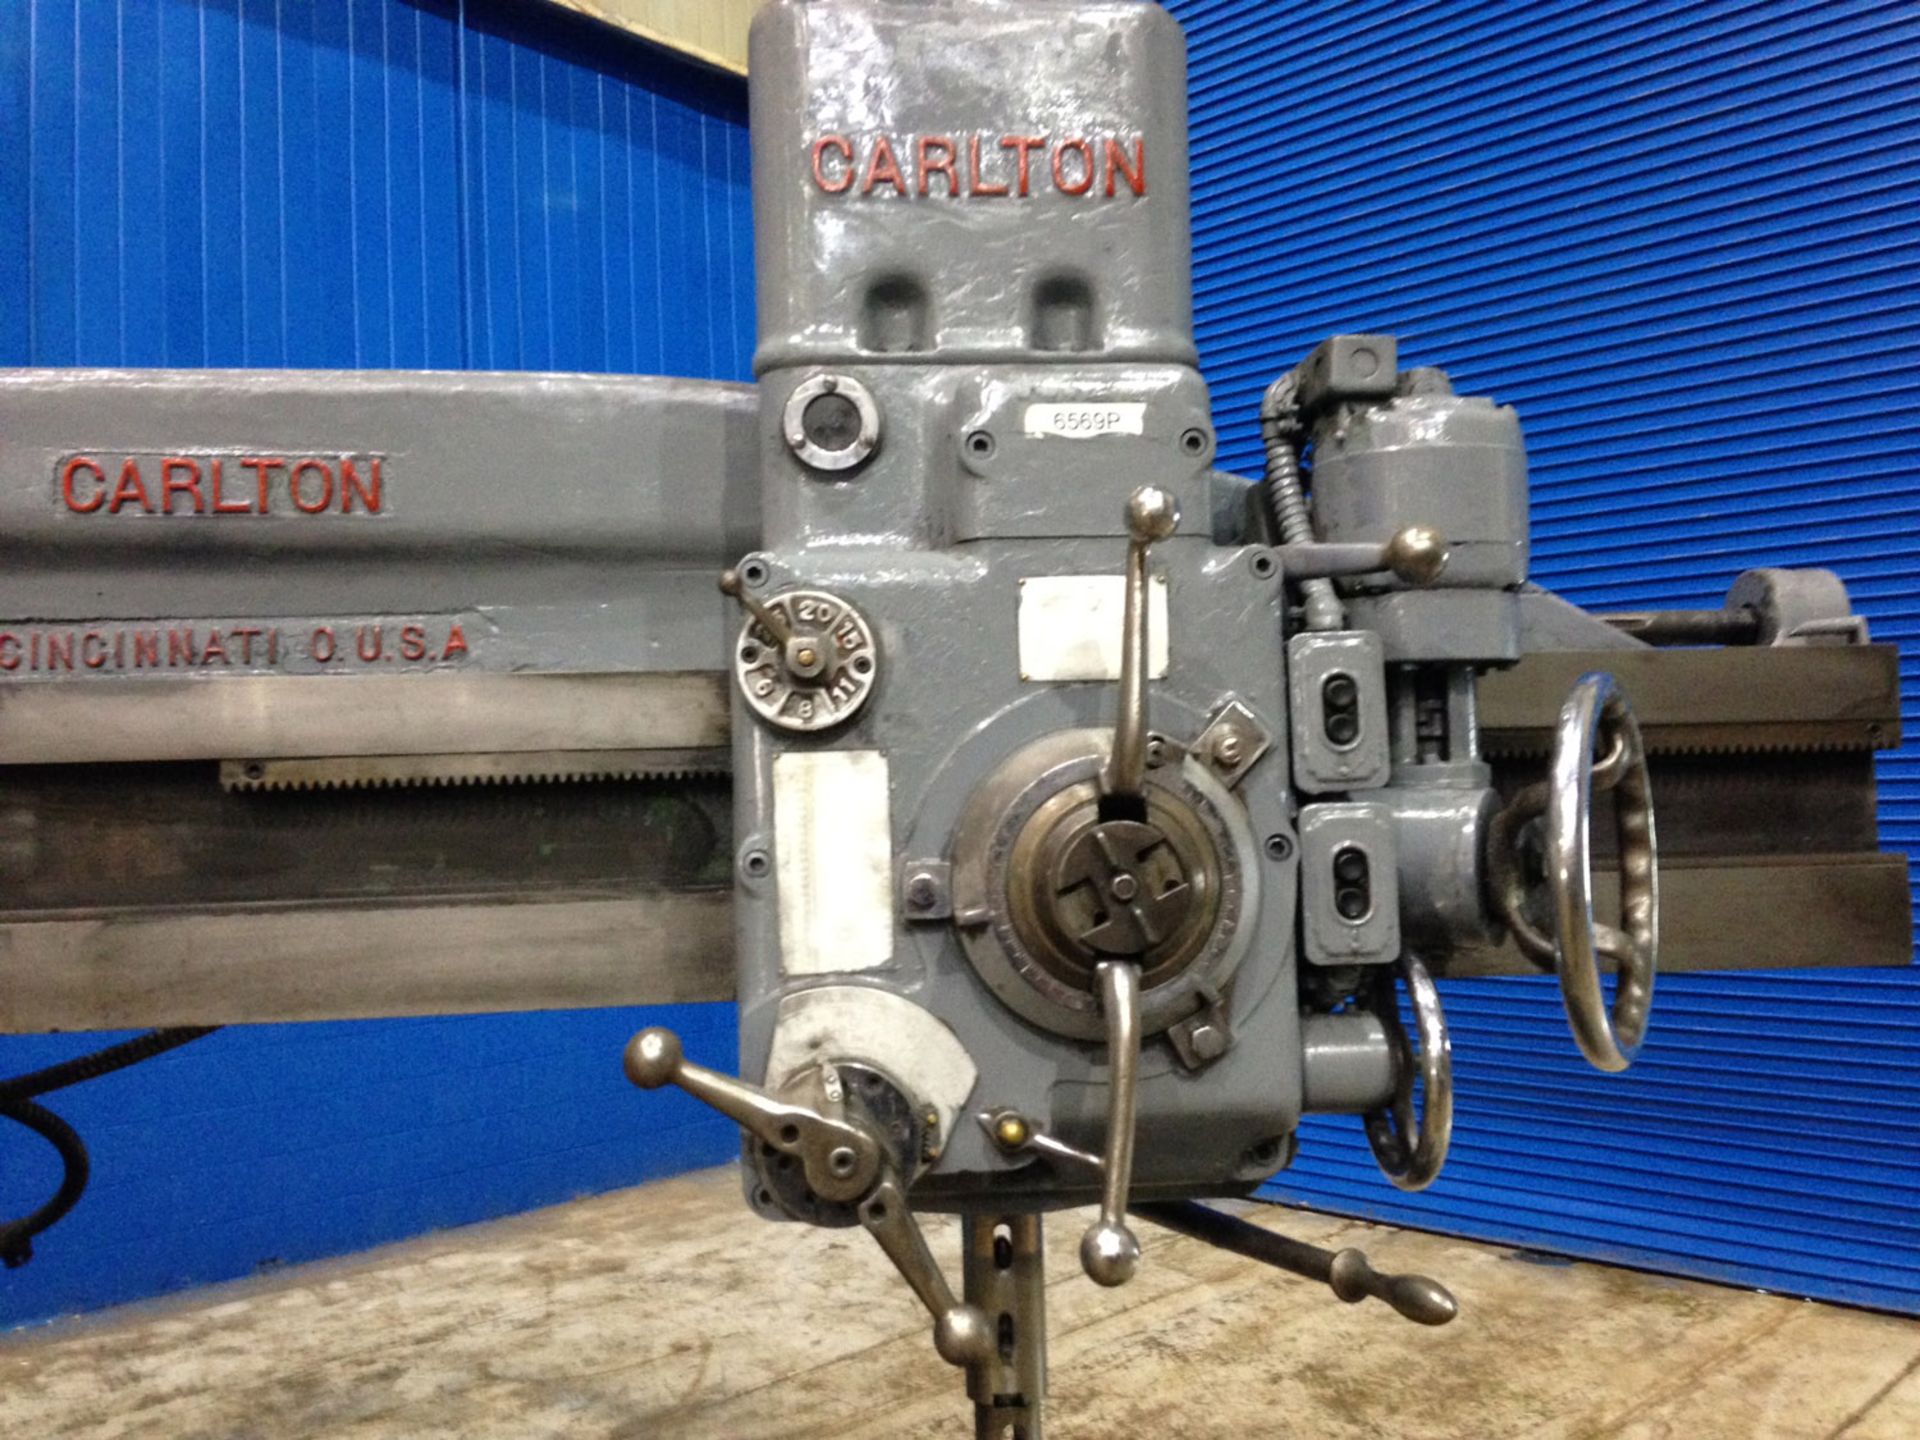 FREE LOADING - Located In: Painesville, OH - Carlton Radial Arm Drill, 5' x 11", Mdl: 1A, S/N: 1254 - Image 6 of 6